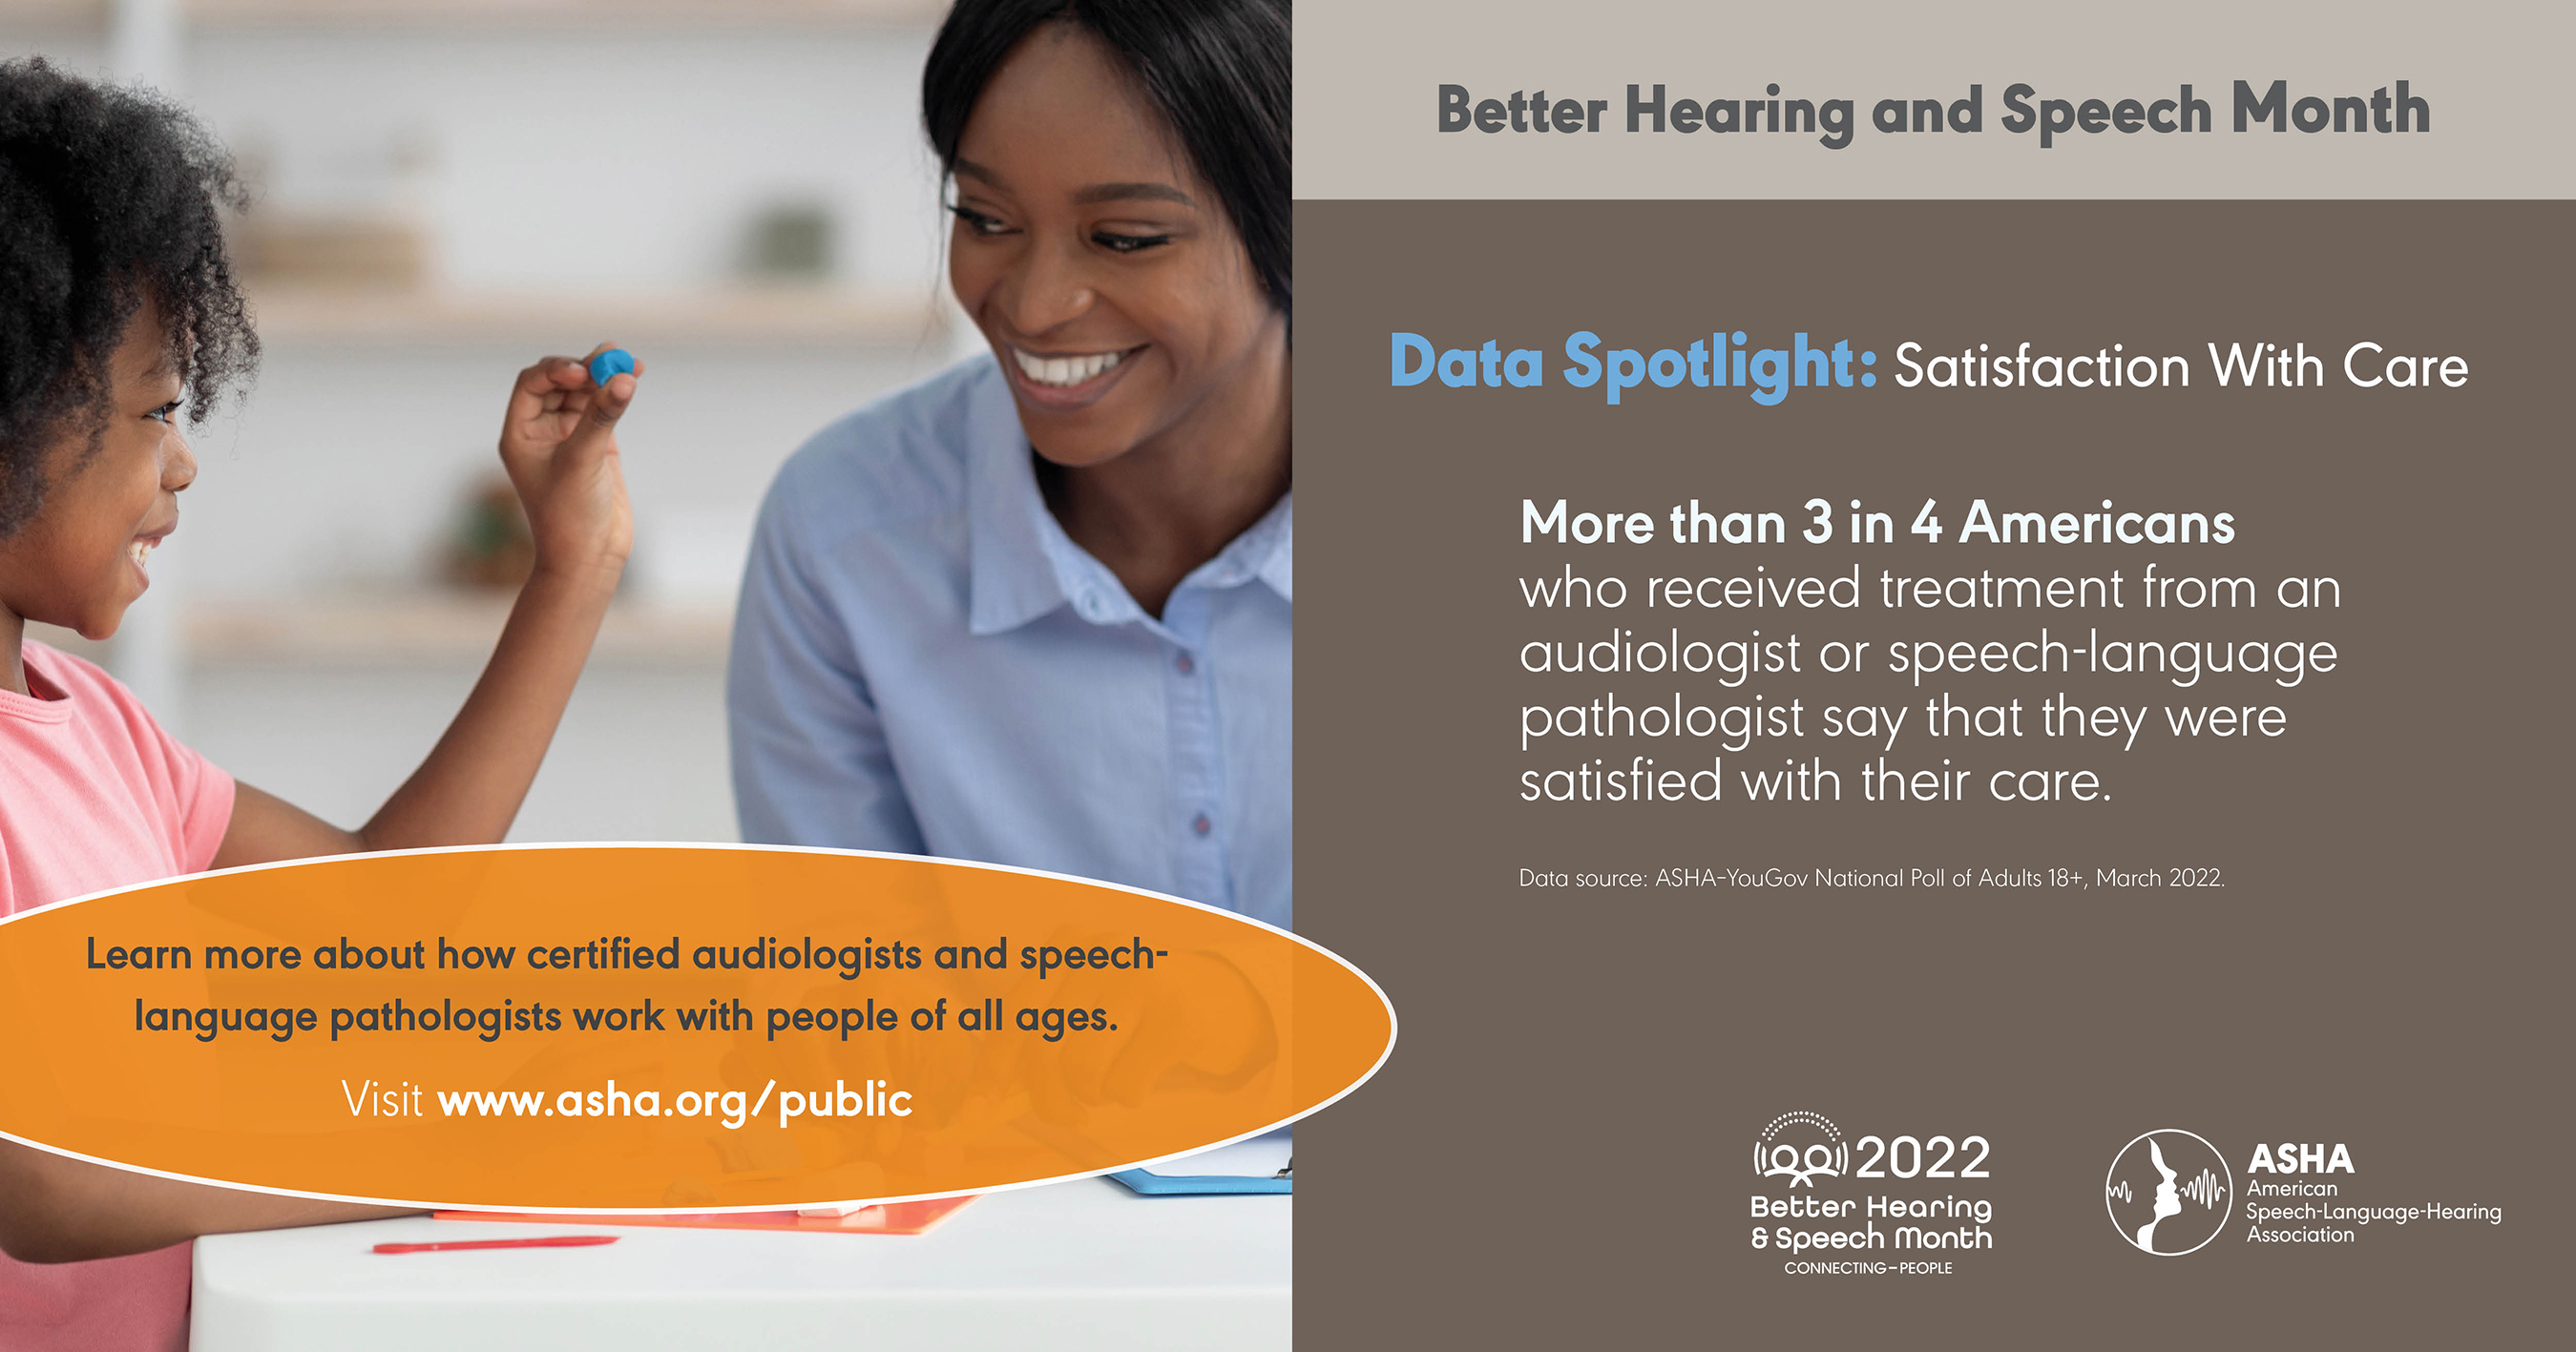 Data Spotlight: Satisfaction With Care